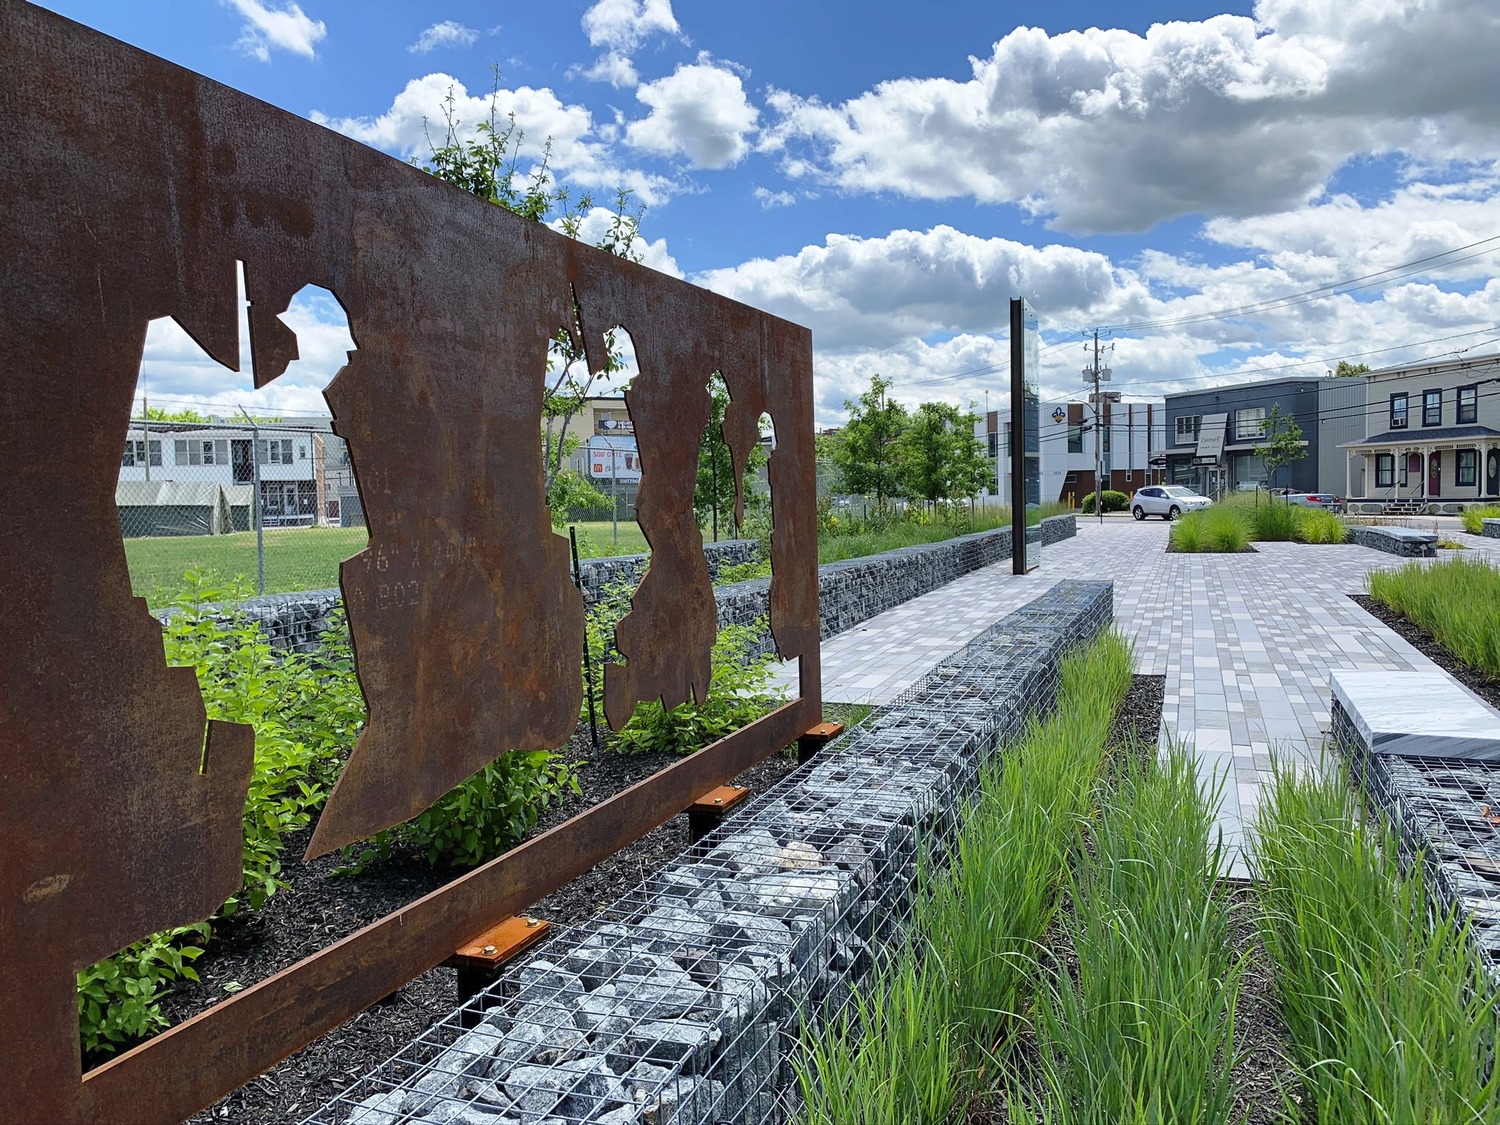 A rusty metal sculpture sits in the middle of a grassy area.